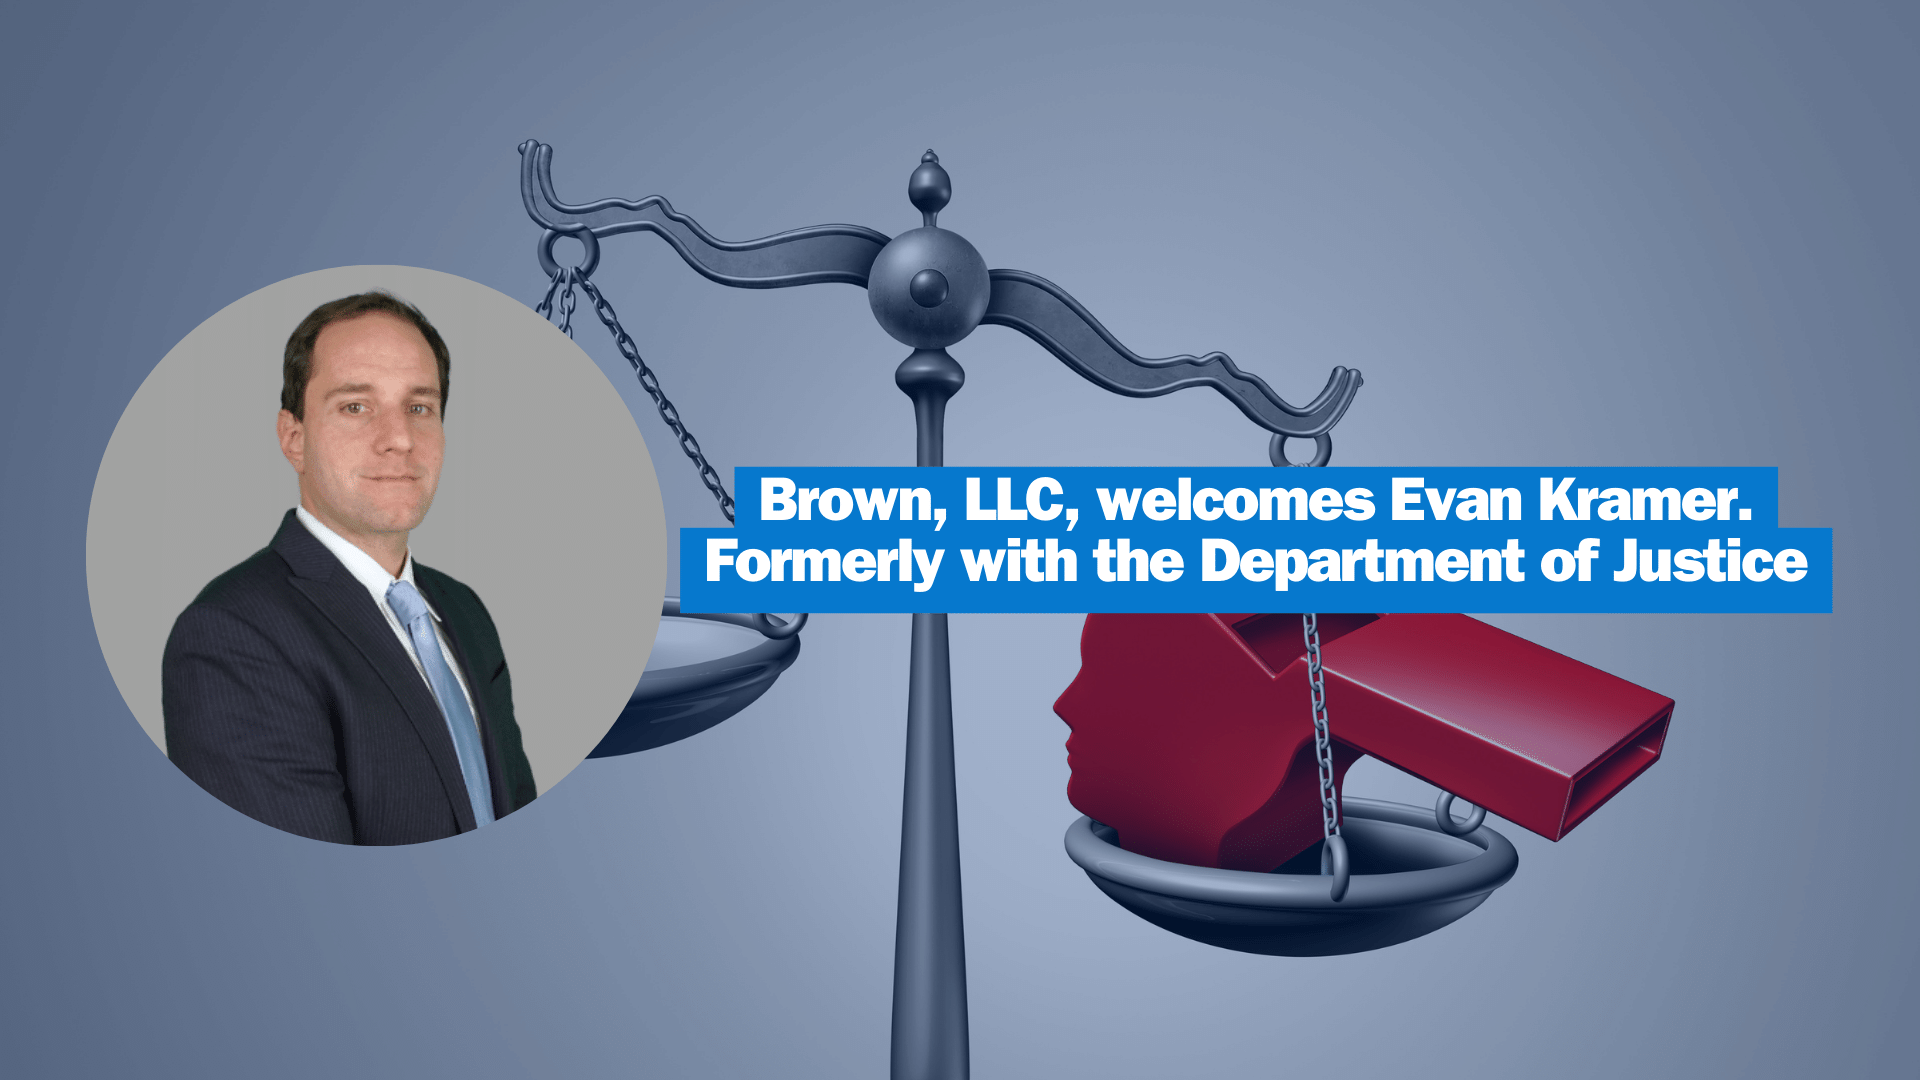 Storied Whistleblower Law Firm Brown, LLC Welcomes Evan Kramer-Formerly with the Department of Justice